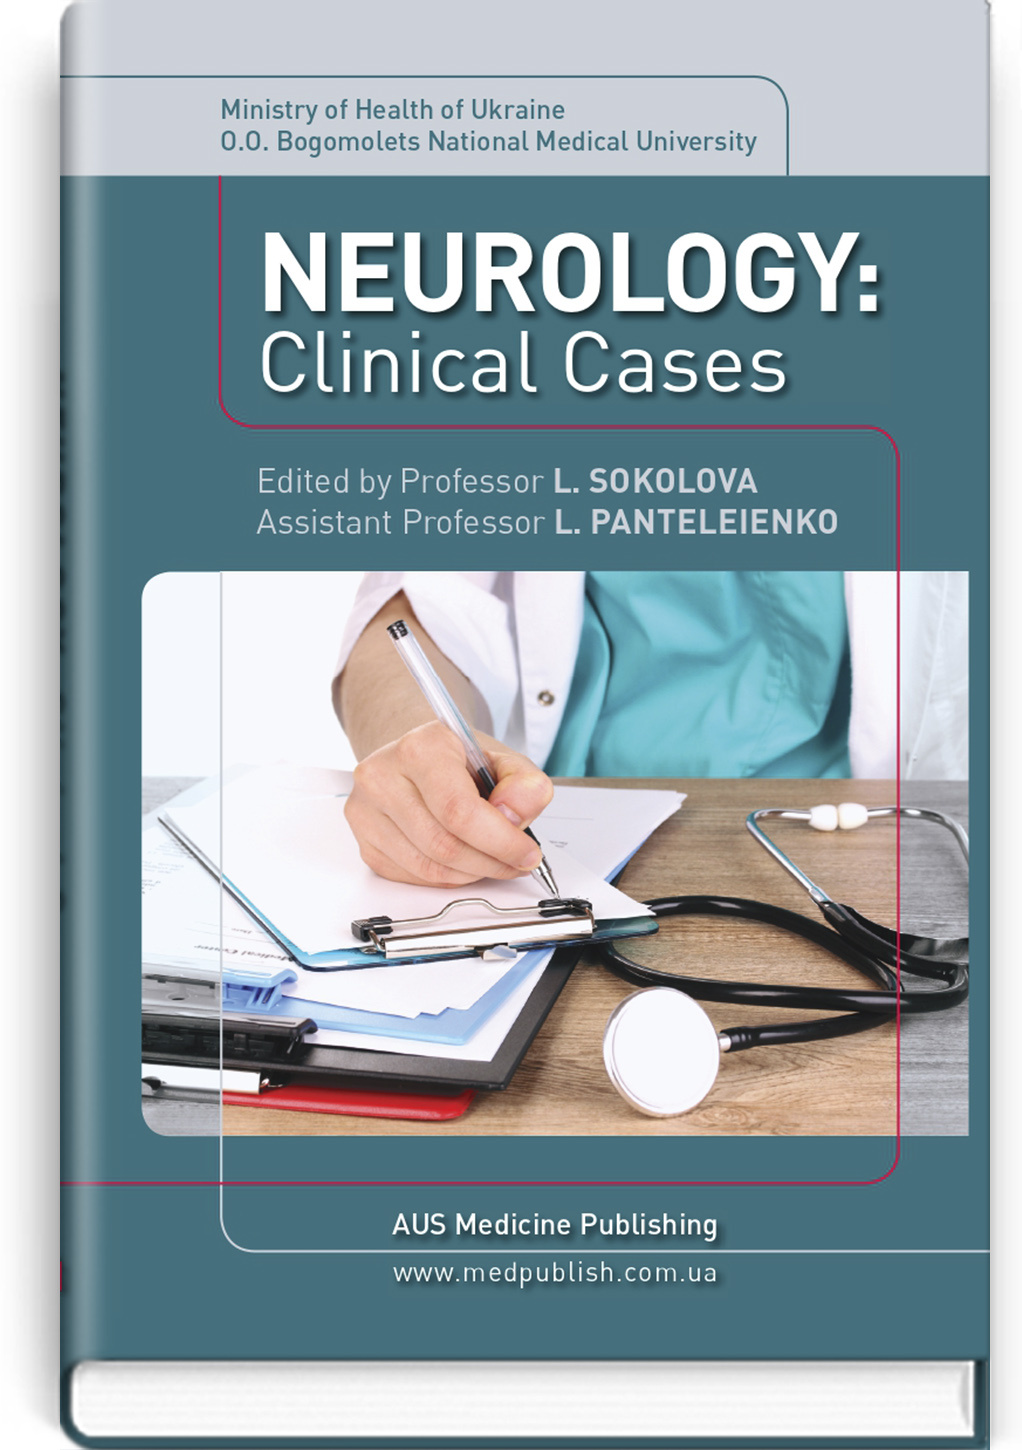 Neurology: Clinical Cases: study guide